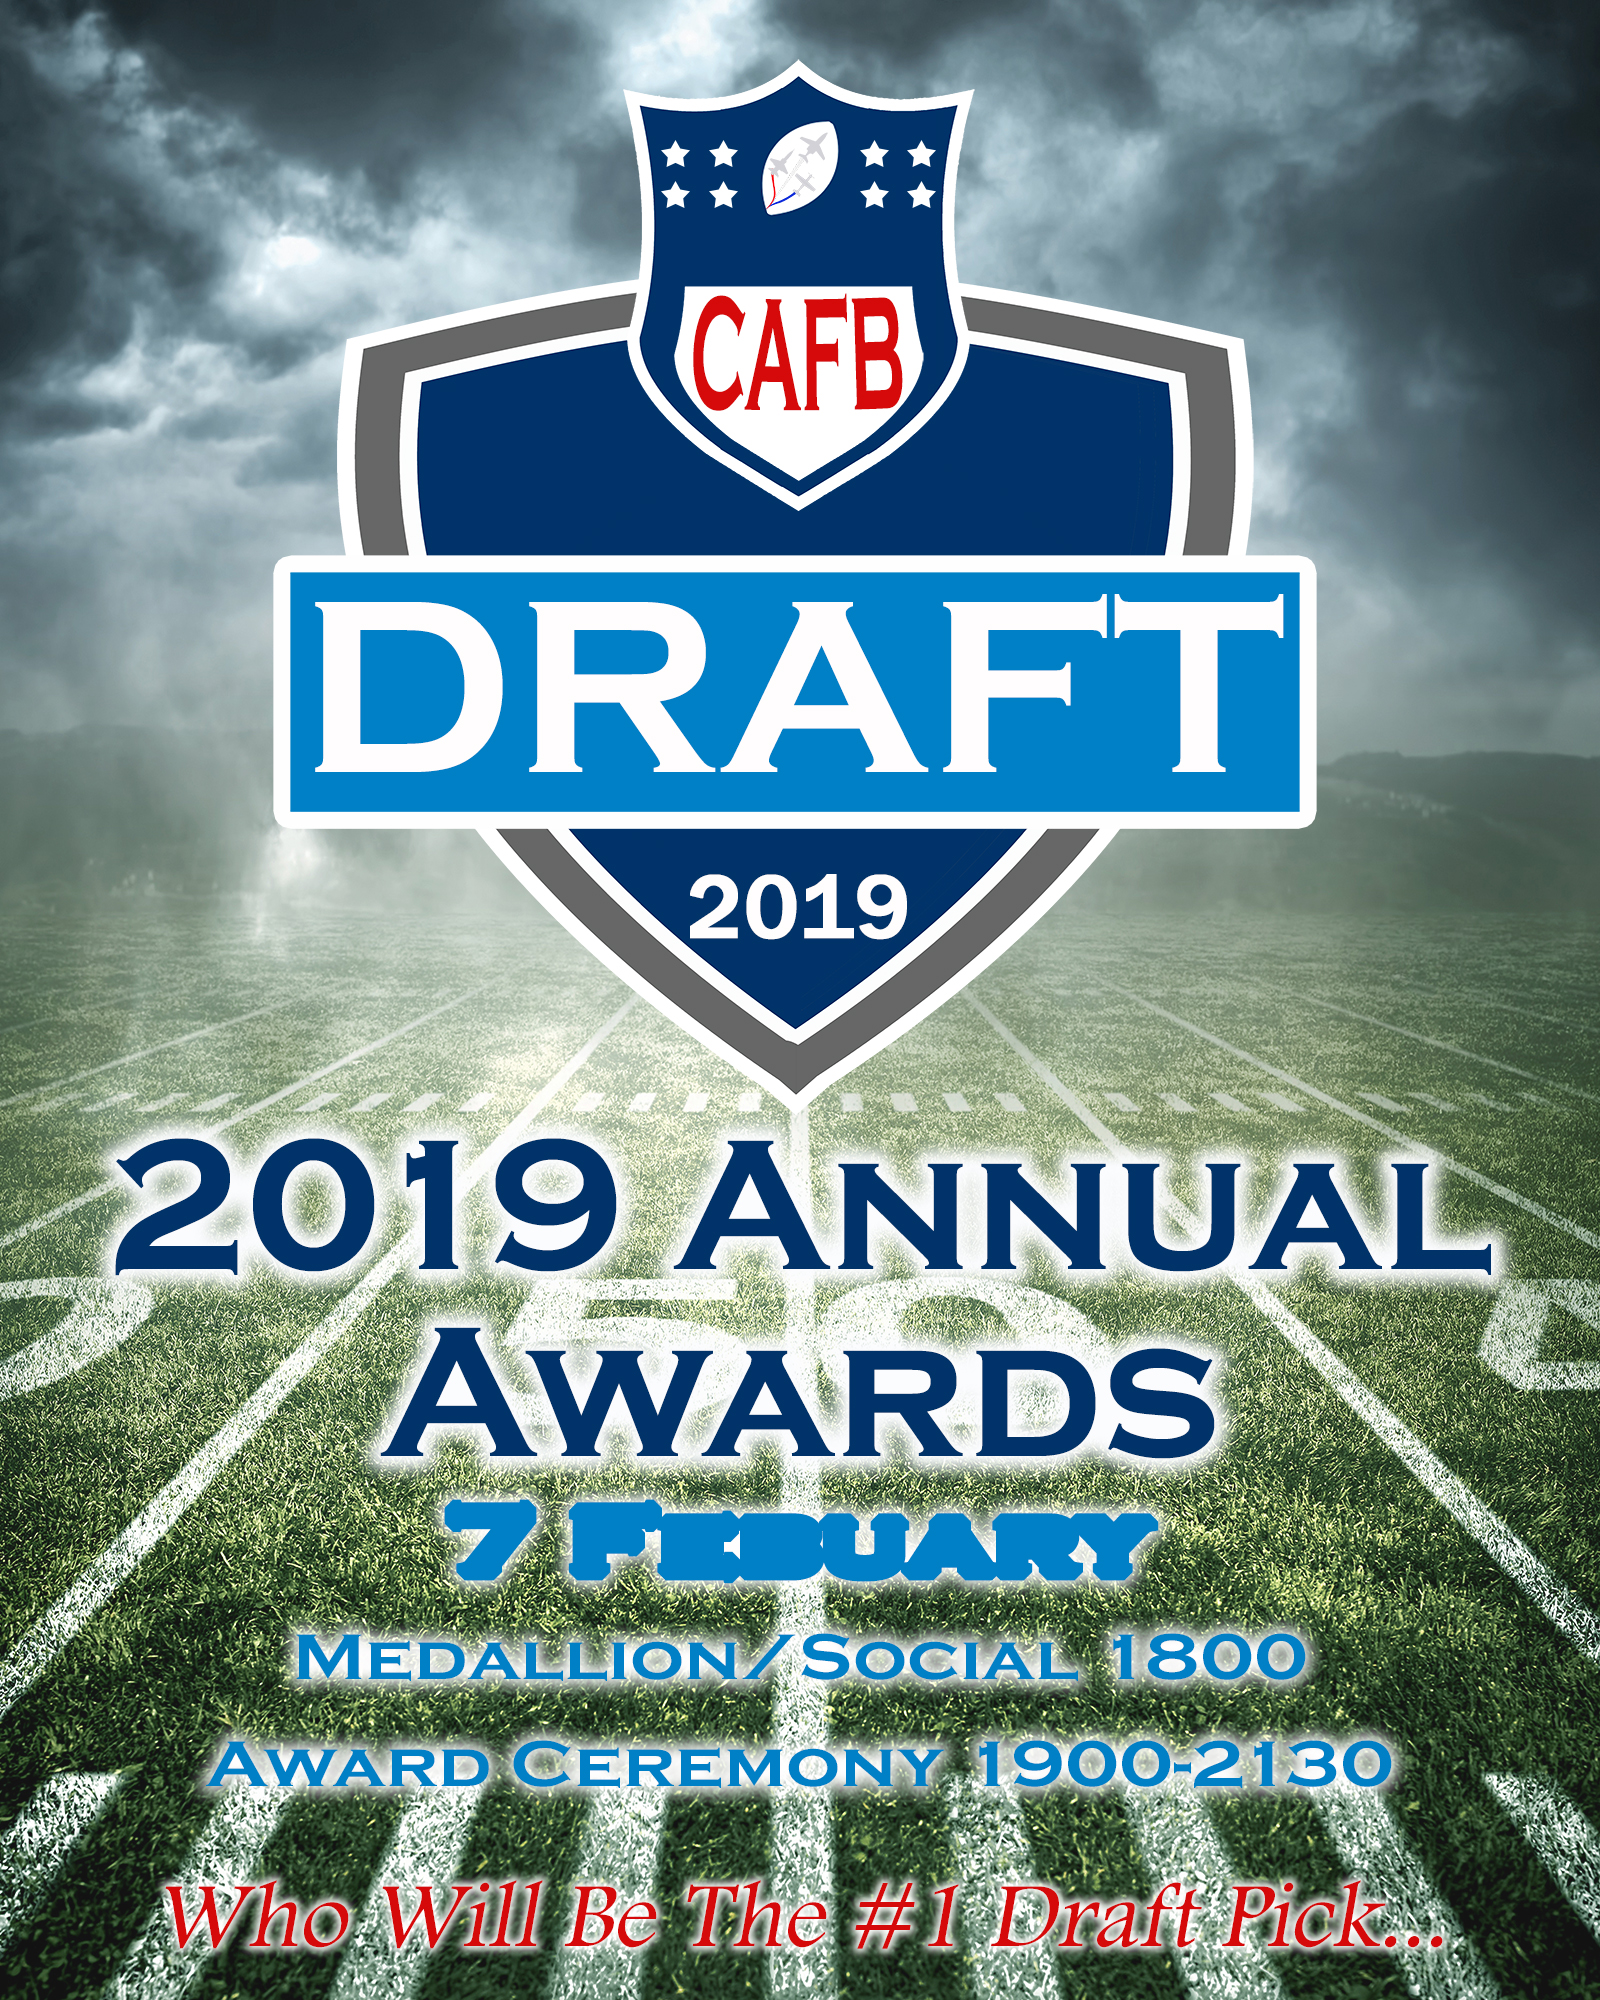 Image of Poster for Annual Awards CAFB